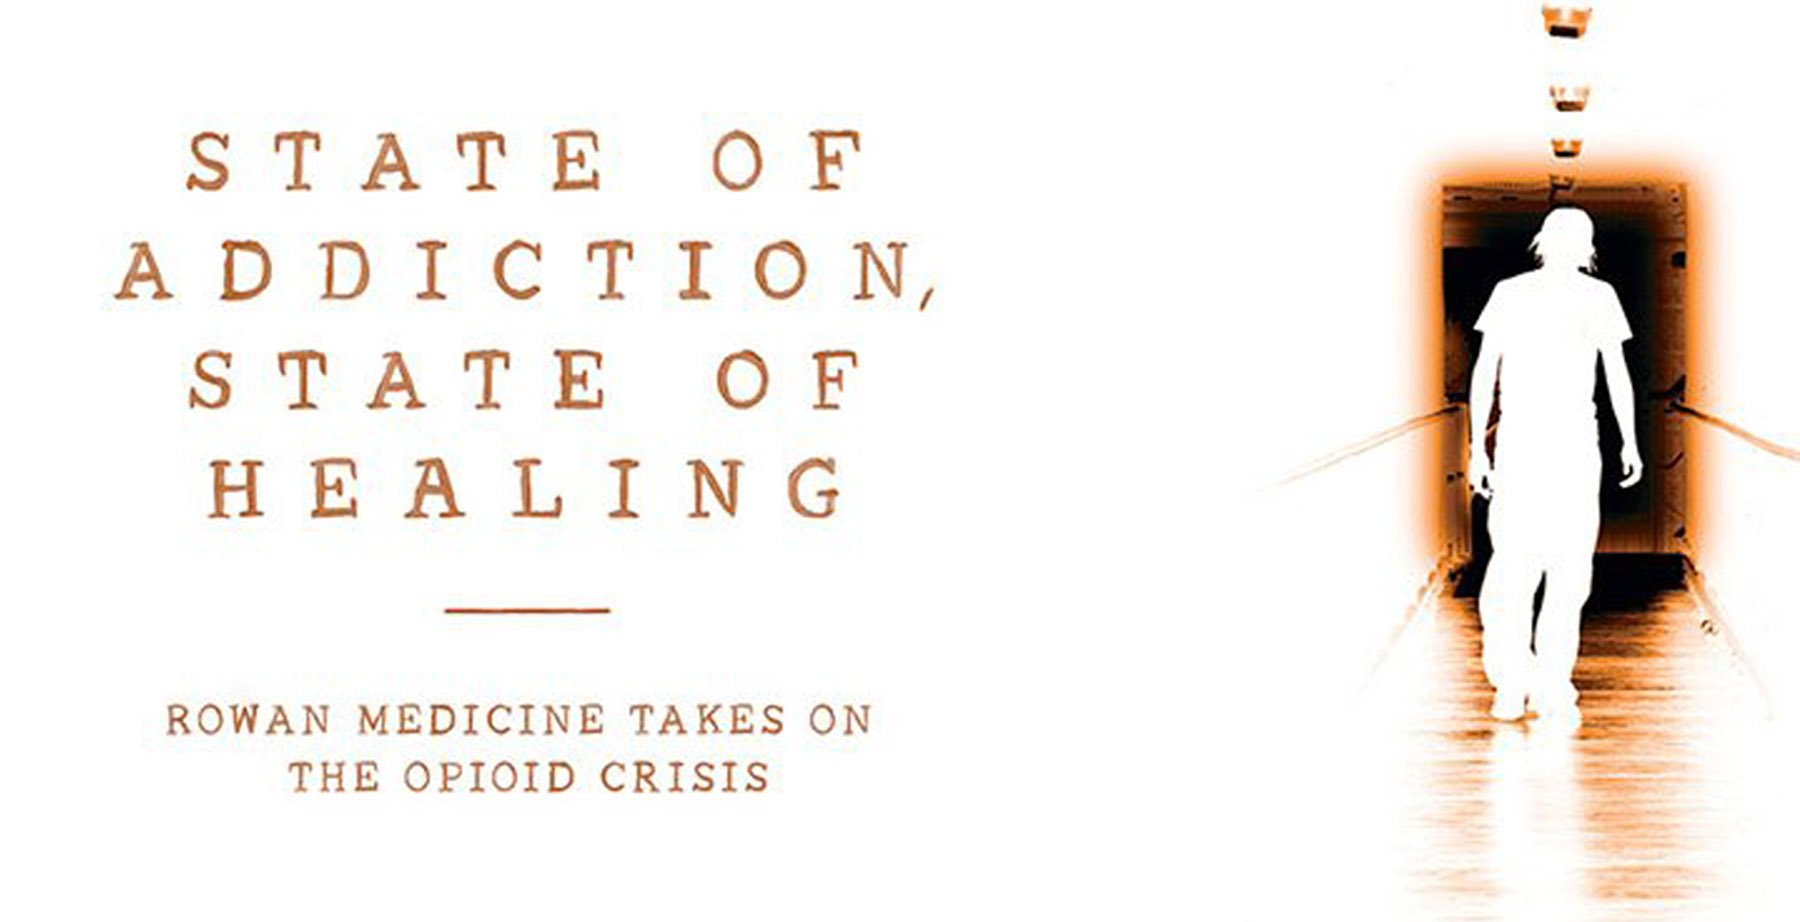 State of Addiction, State of Healing - Rowan Medicine takes on the opioid crisis